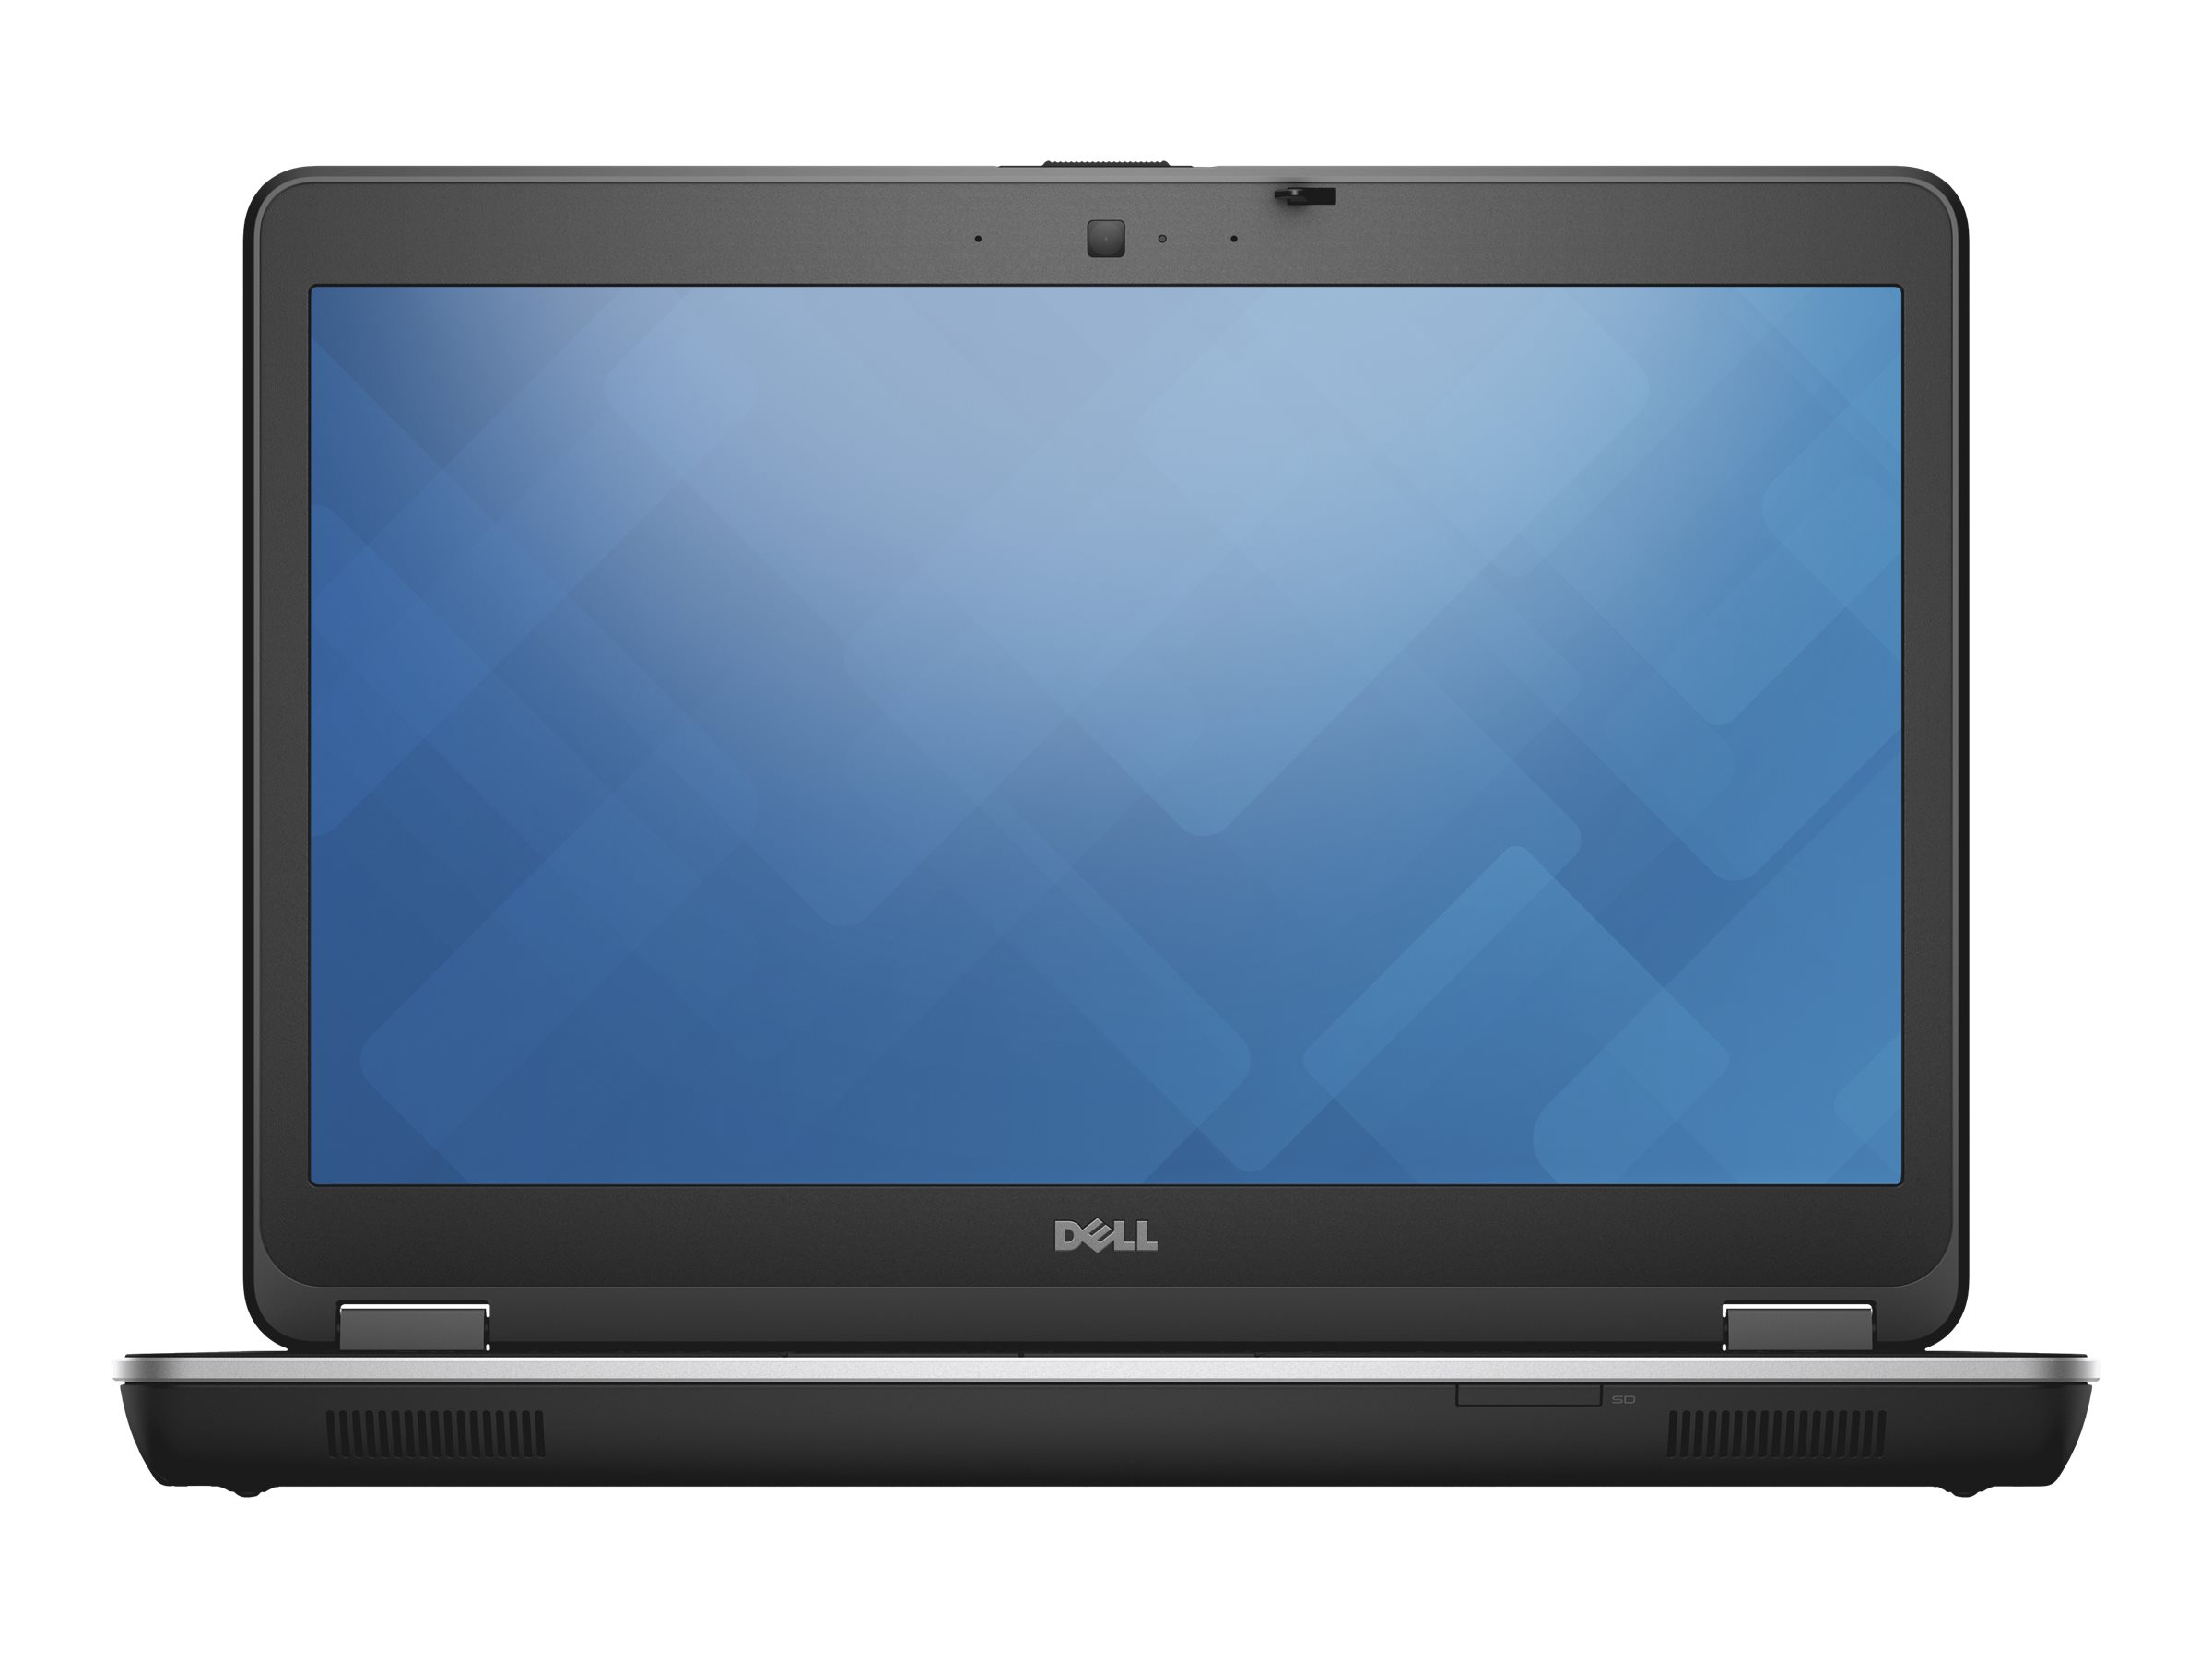 Dell Latitude 5400 Review - Benchmarks and Specs